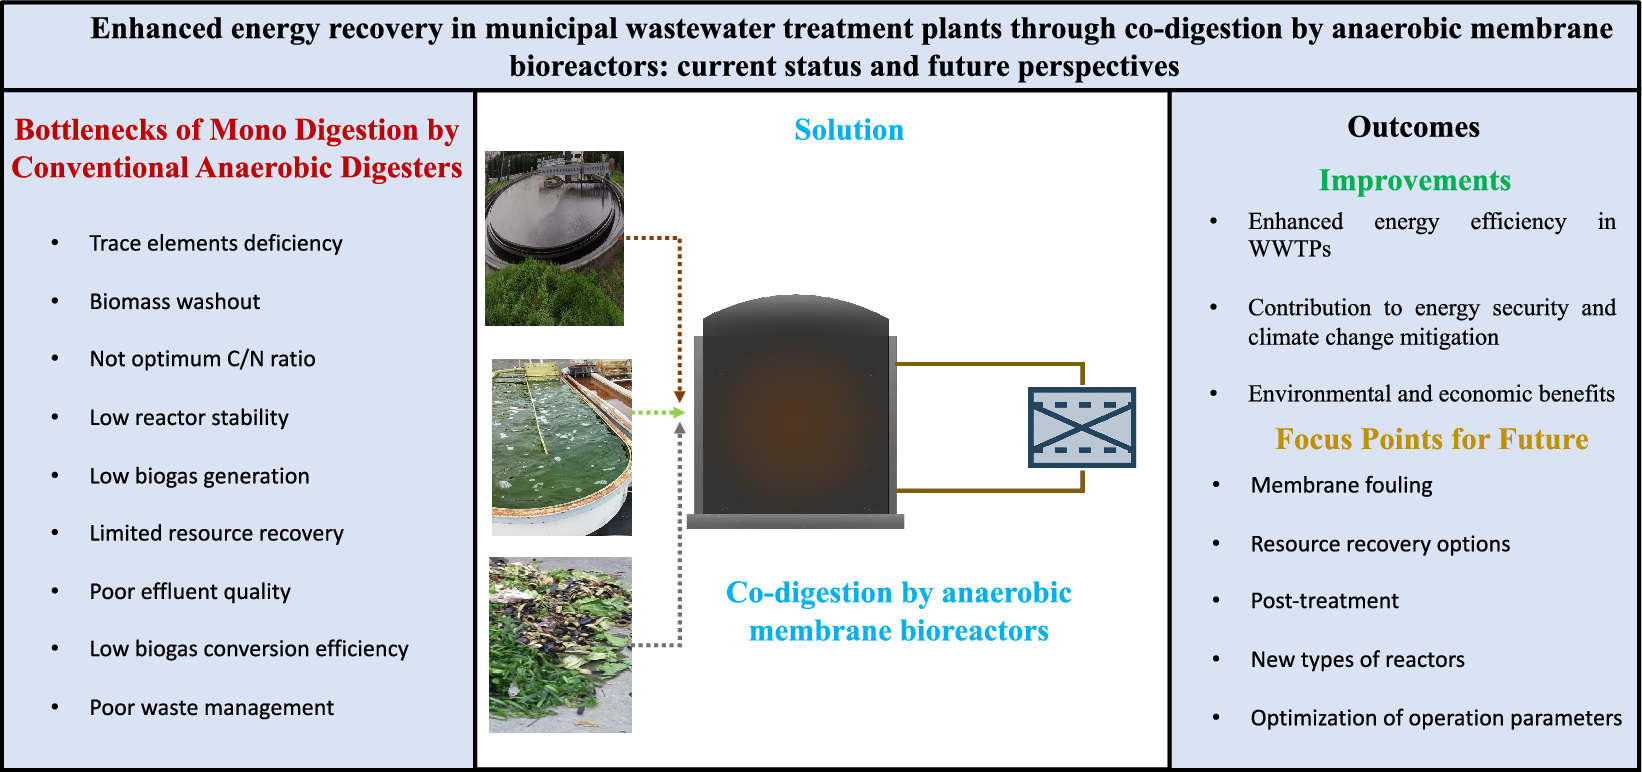 Enhanced energy recovery in municipal wastewater treatment plants through co-digestion by anaerobic membrane bioreactors: current status and future perspectives